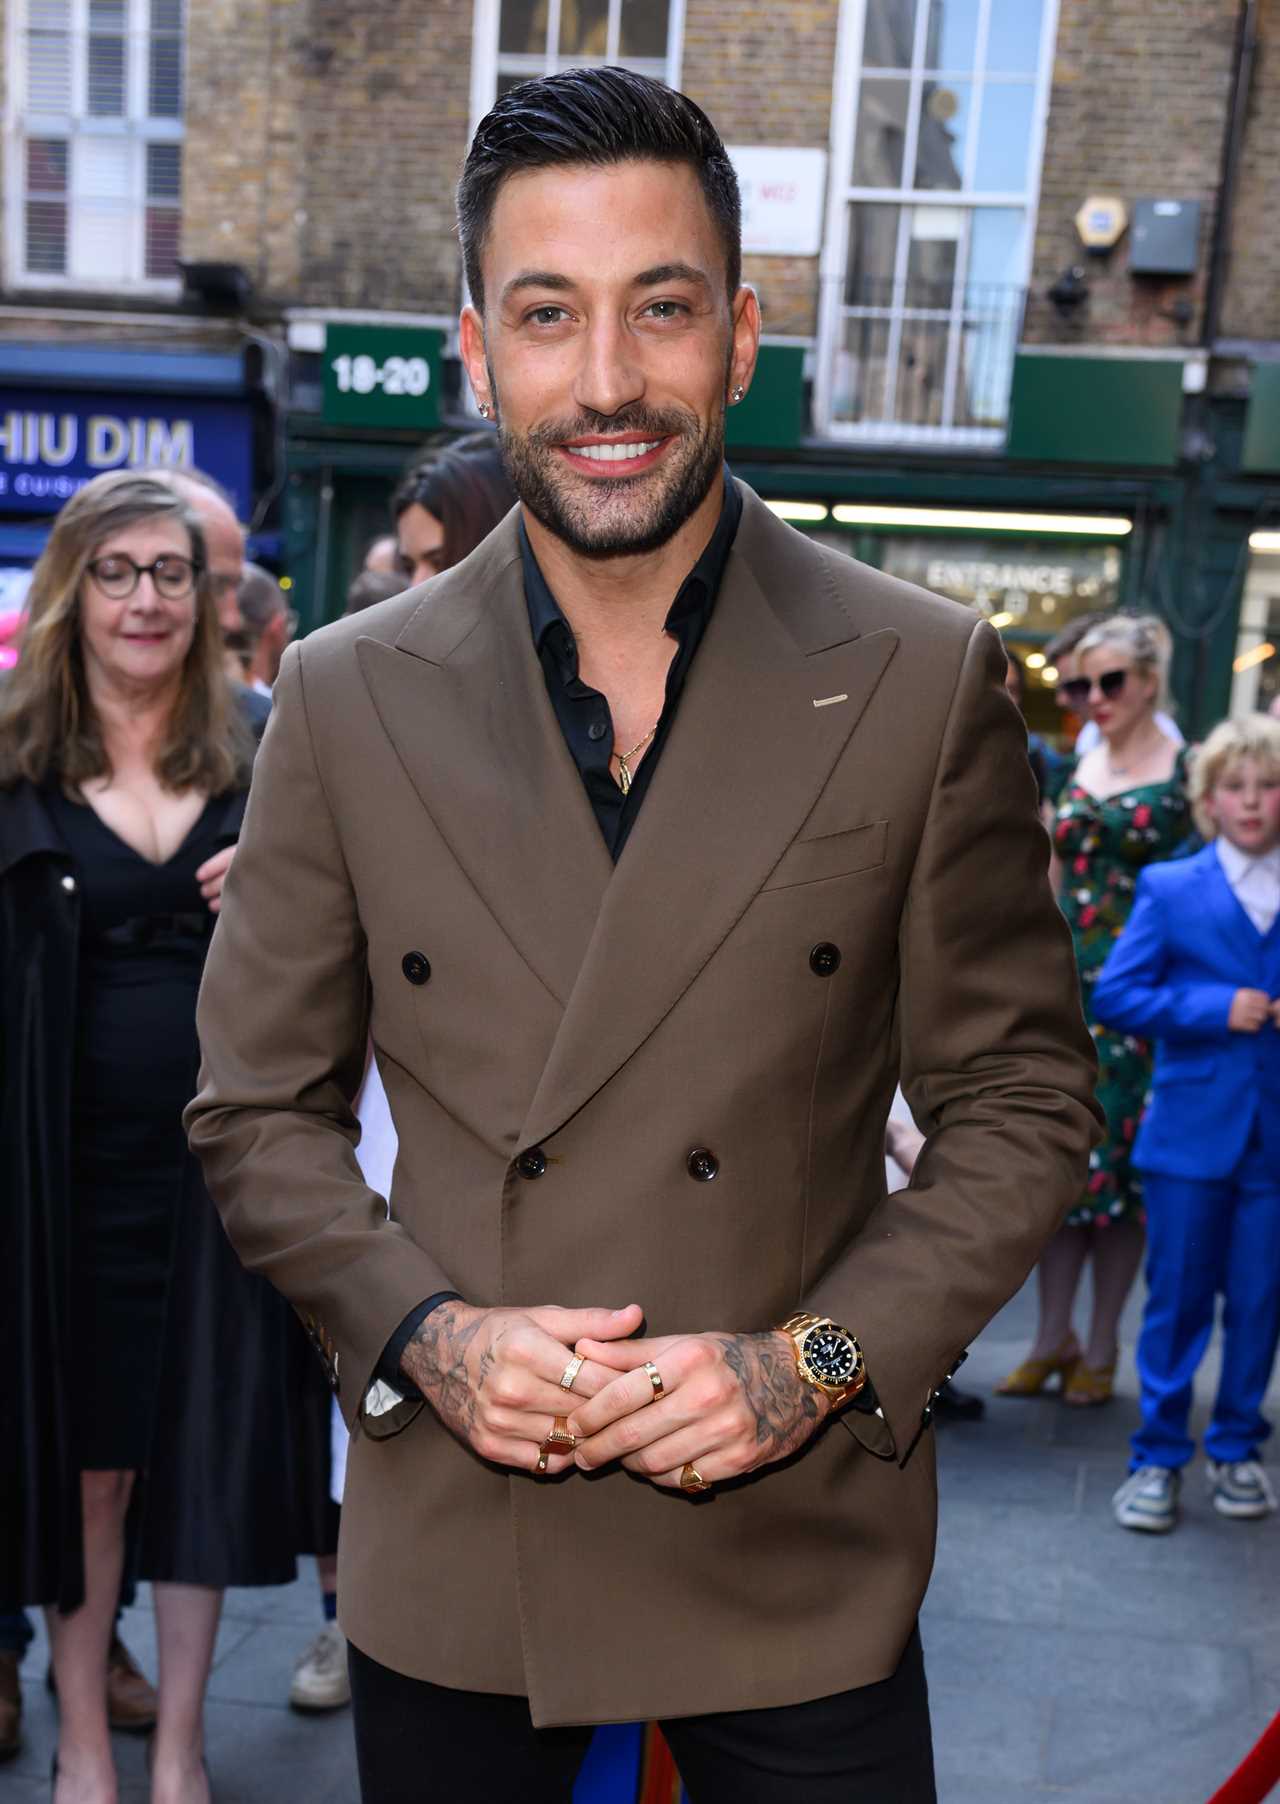 Giovanni Pernice professes love for former Strictly co-star amid misconduct investigation